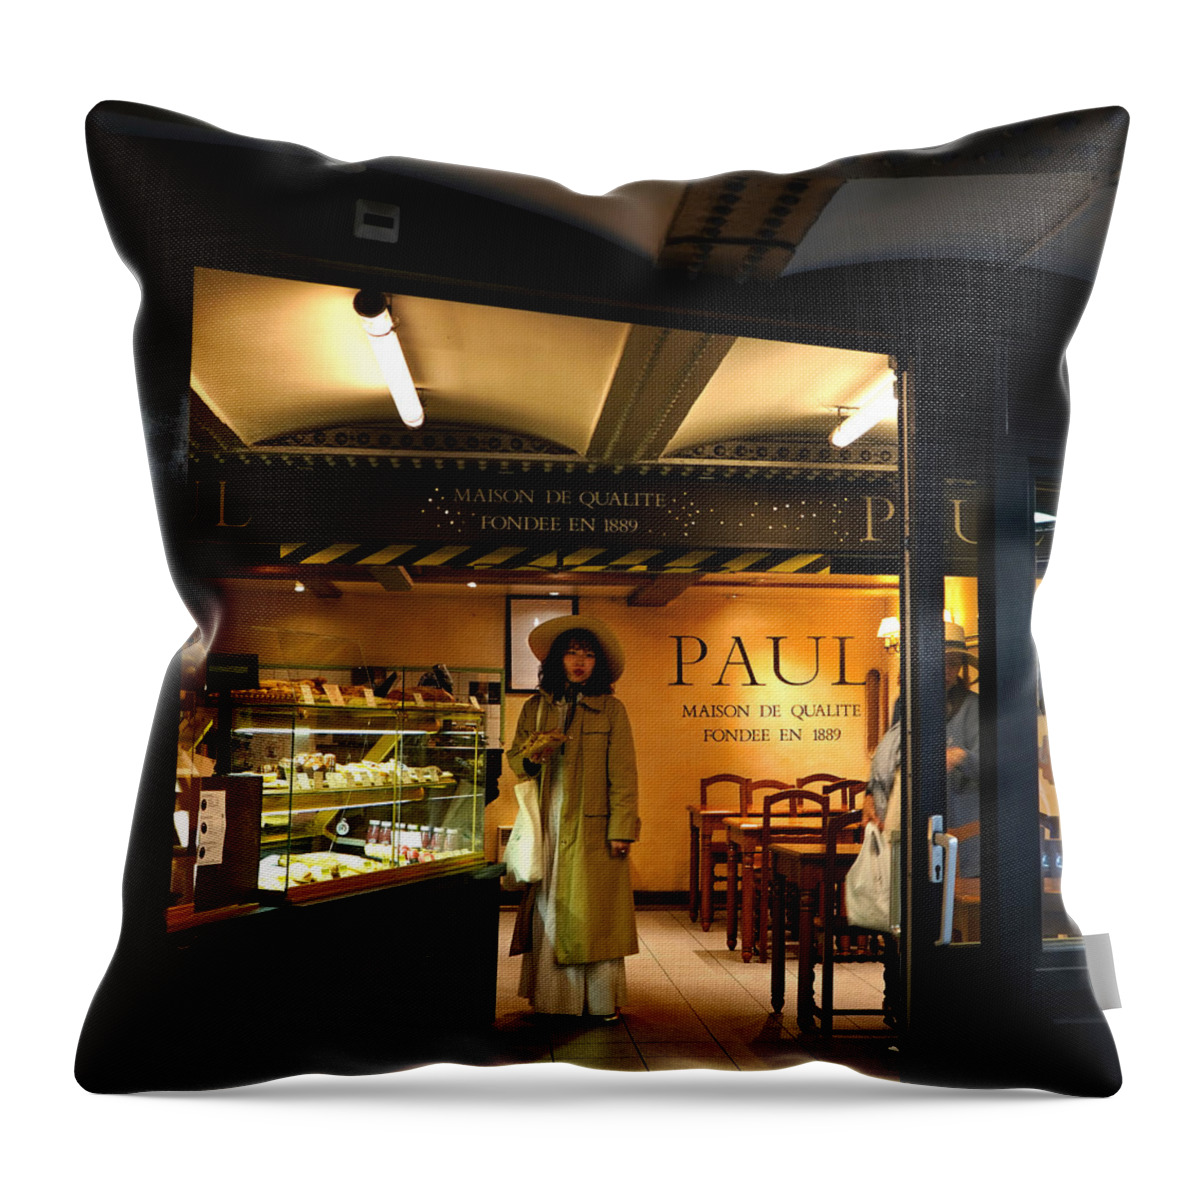 Paris Cafe Throw Pillow featuring the photograph Paris Cafe Girl by Andrew Fare